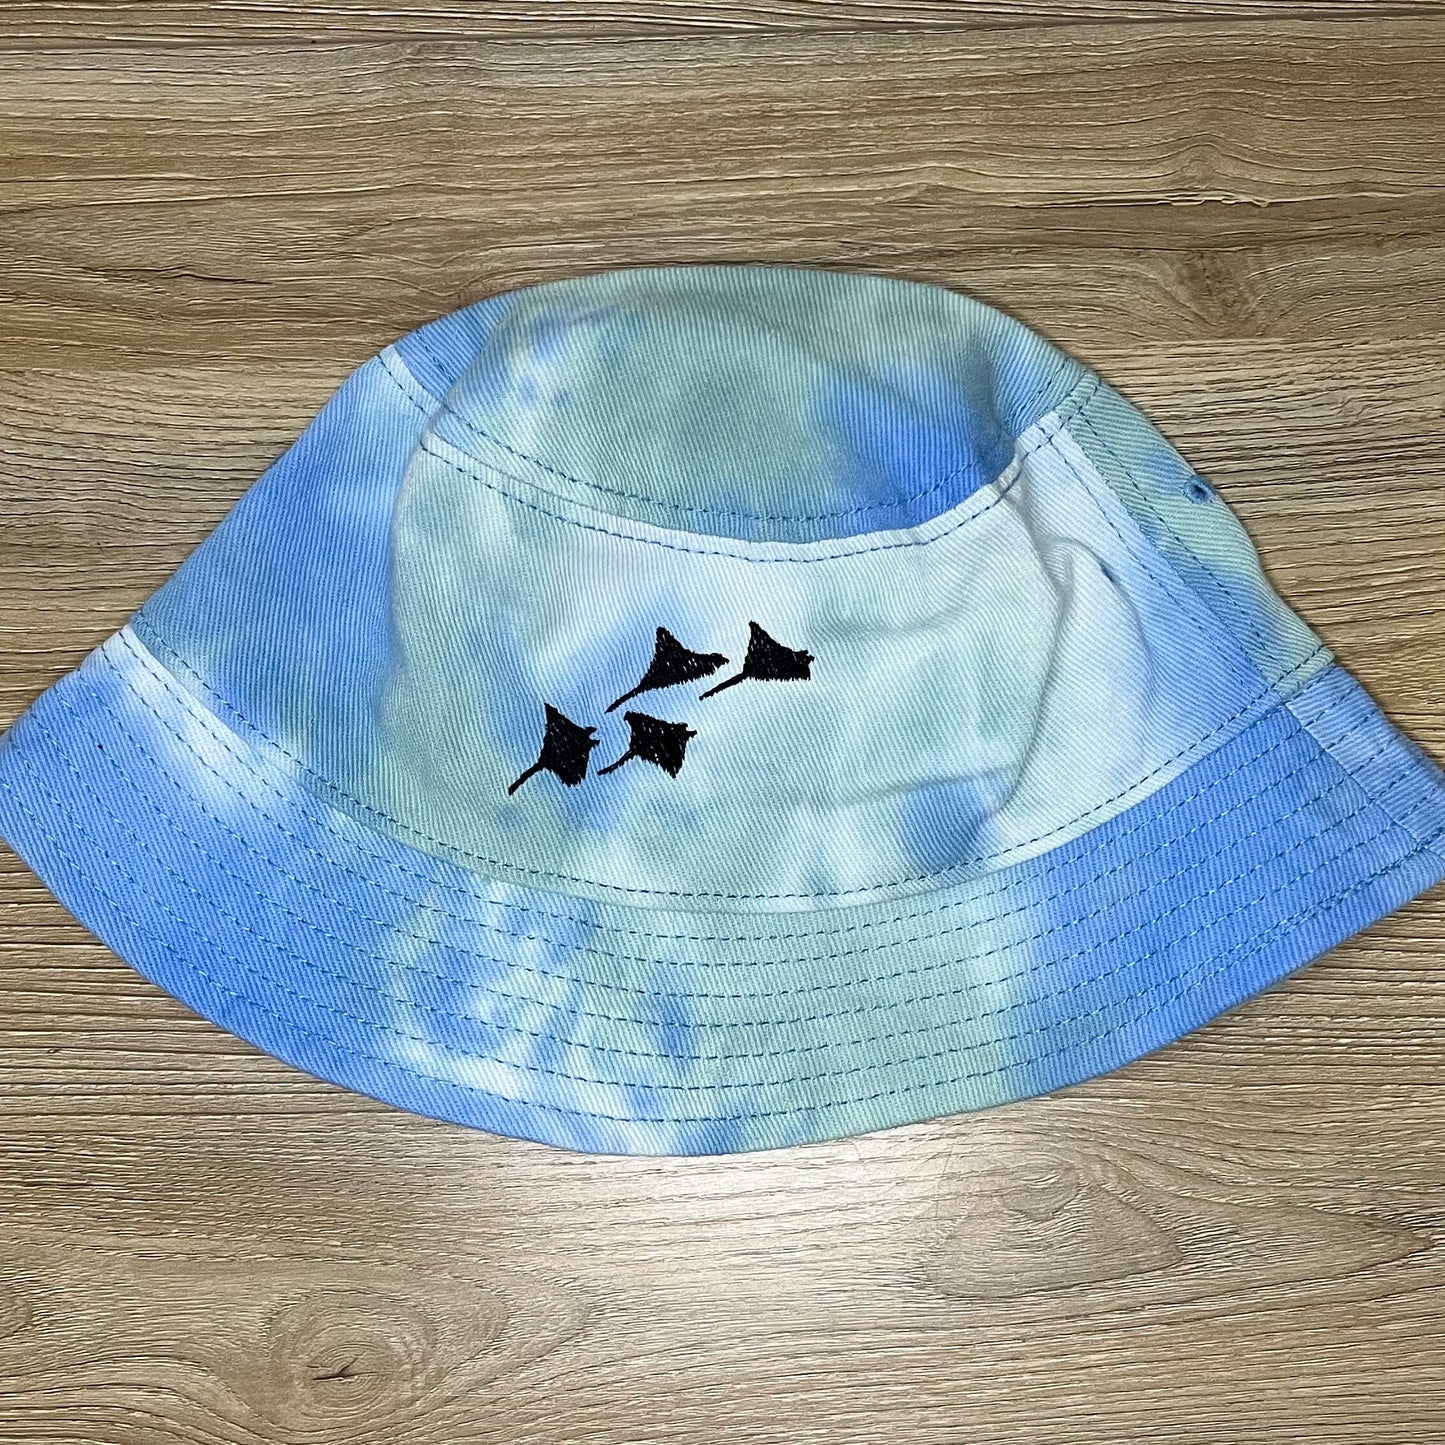 Manta Ray Tie Dye Bucket Hat - Connected Clothing Company - 10% donated to ocean conservation